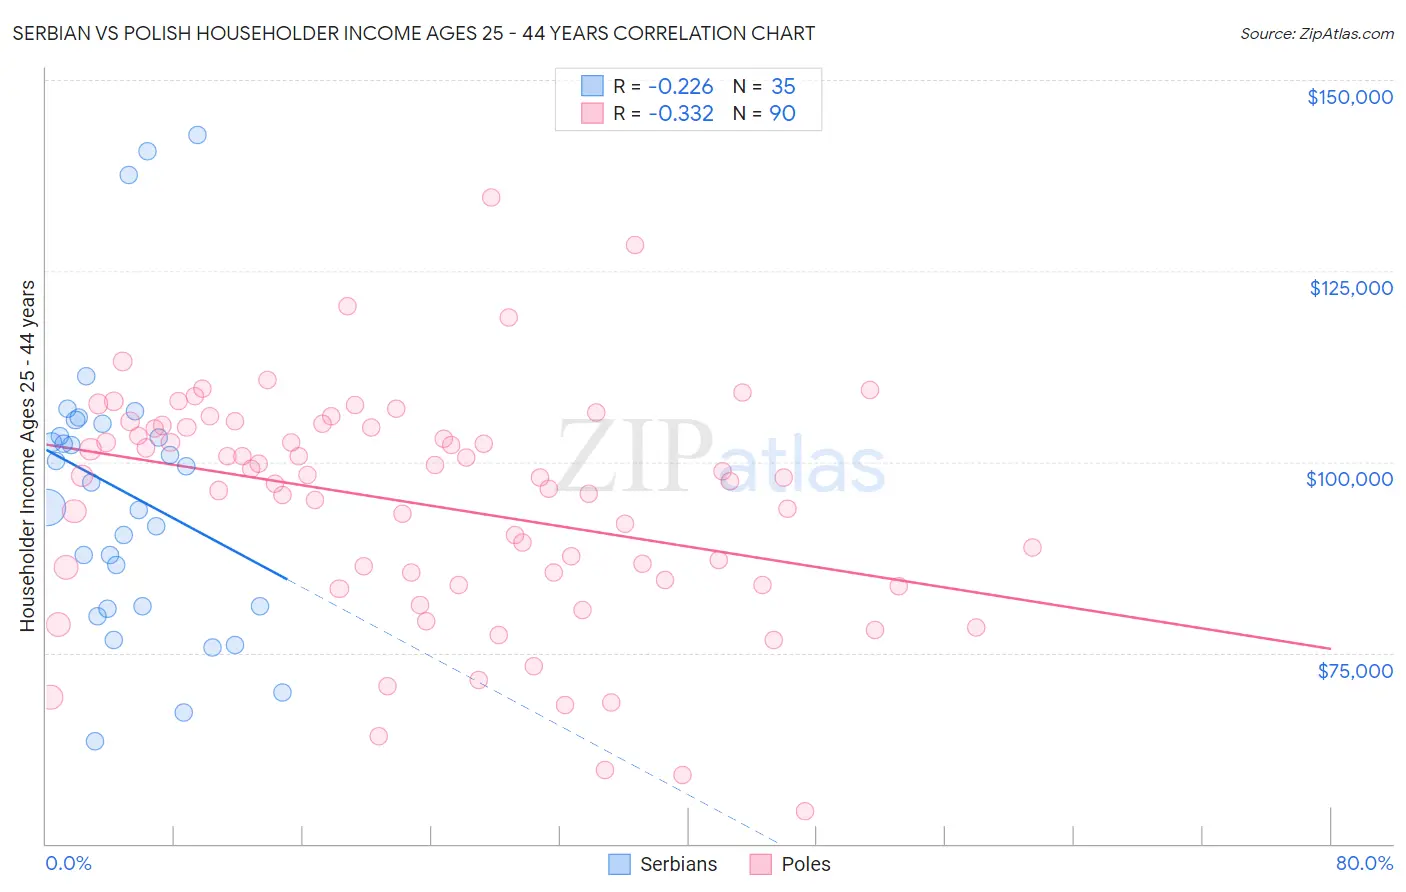 Serbian vs Polish Householder Income Ages 25 - 44 years